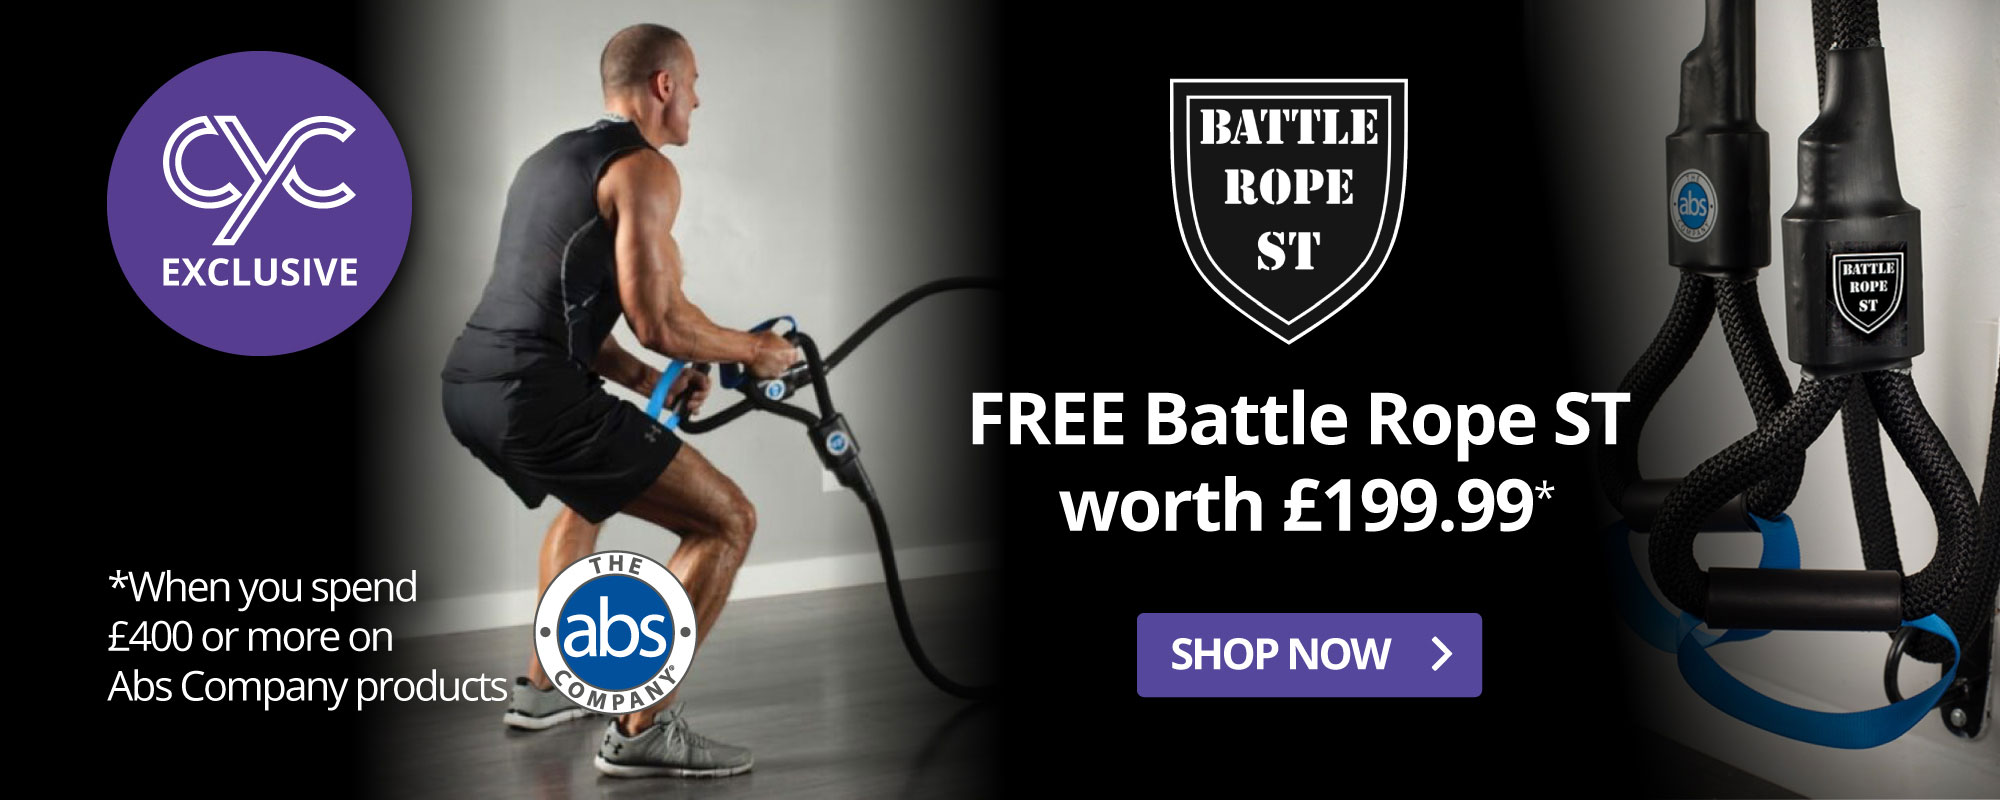 CYC Exclusive - FREE Battle Rope ST worth £199.99 when you spend £400 or more on Abs Company products